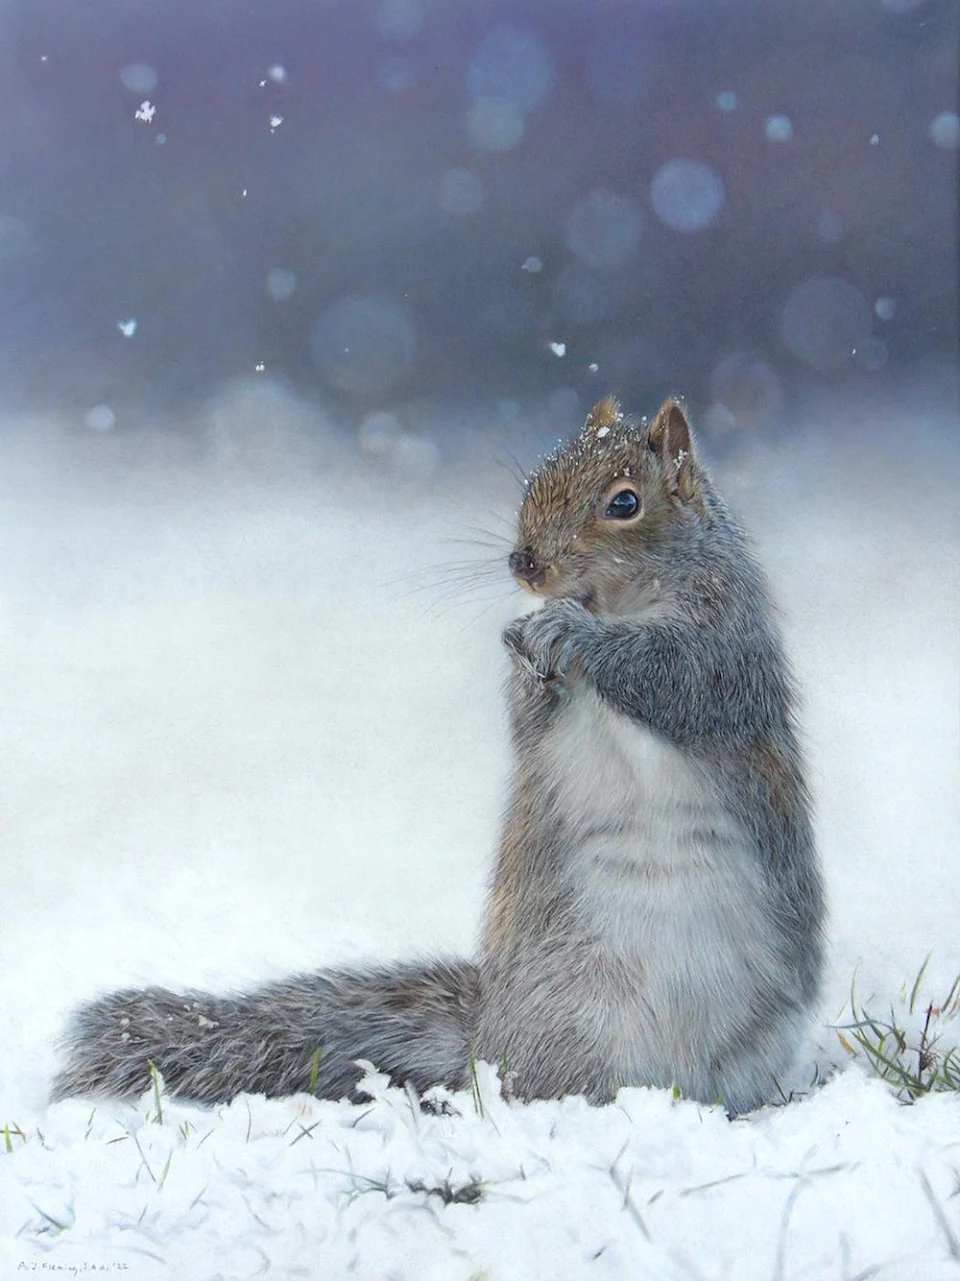 My pastel drawing of a Grey Squirrel, with full info in the comments. Hope you like it!